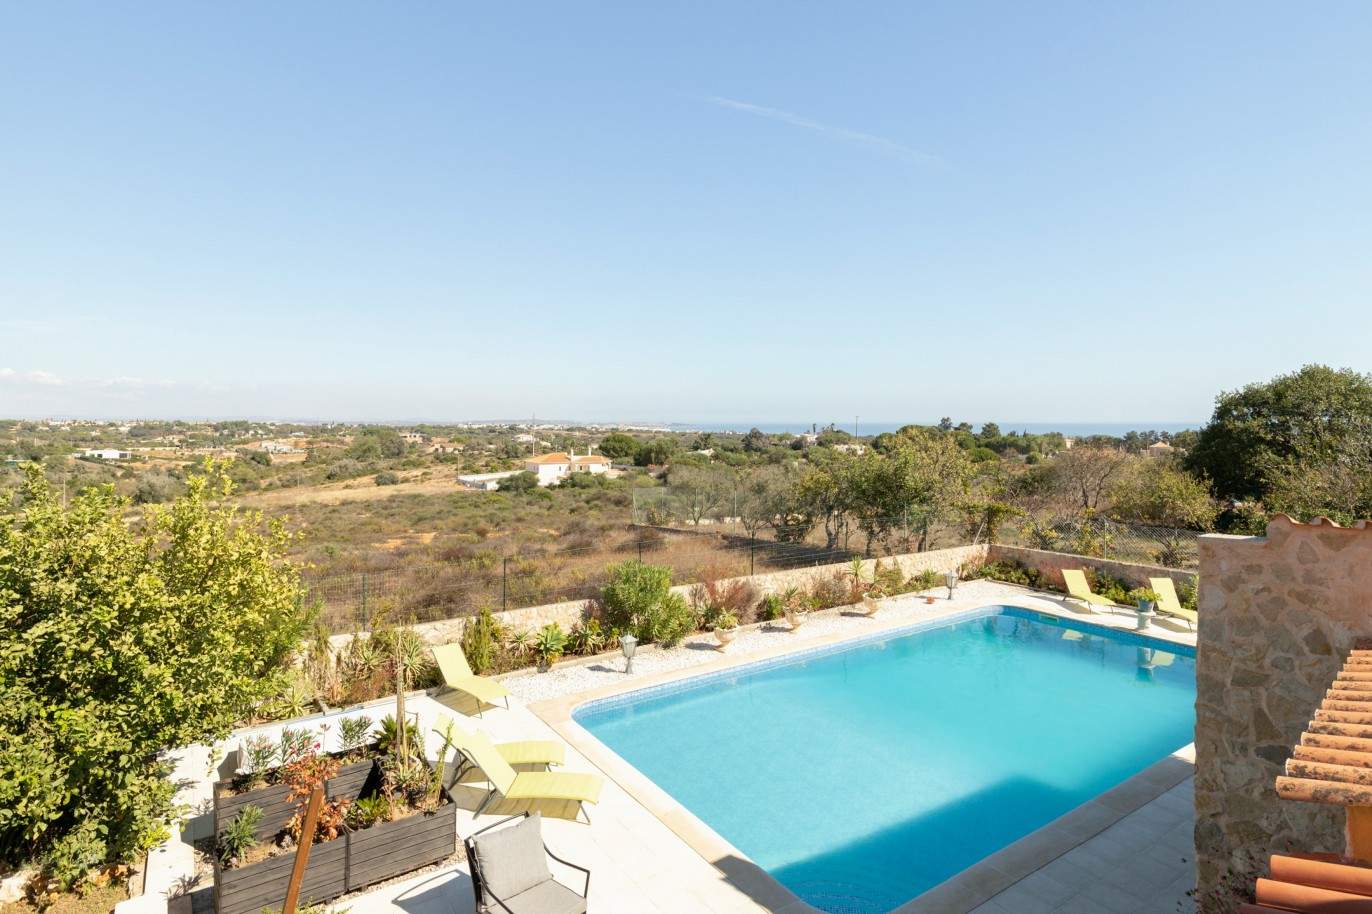 6 Bedrooms detached villa with swimming pool, for sale in Caramujeira, Algarve_209982